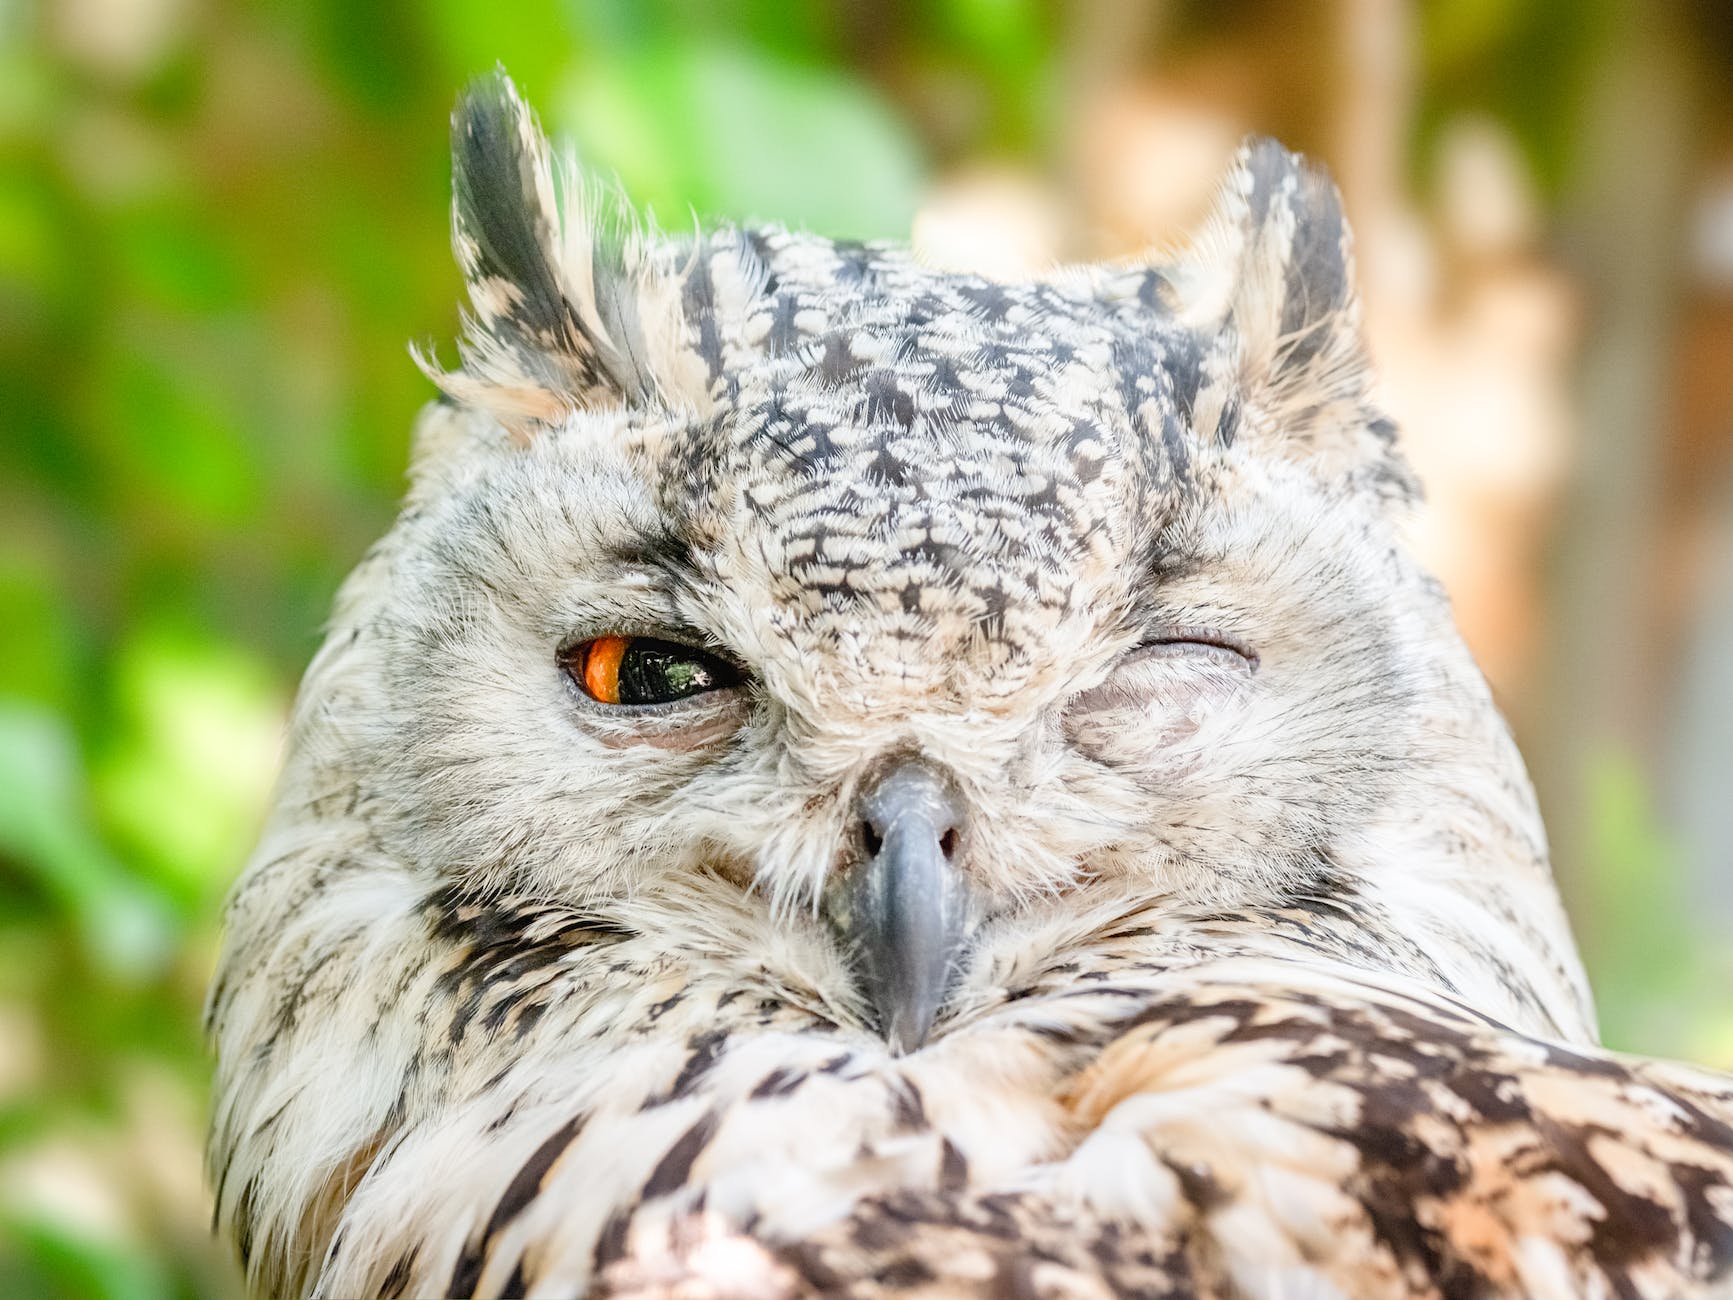 close up photo of owl with one eye open